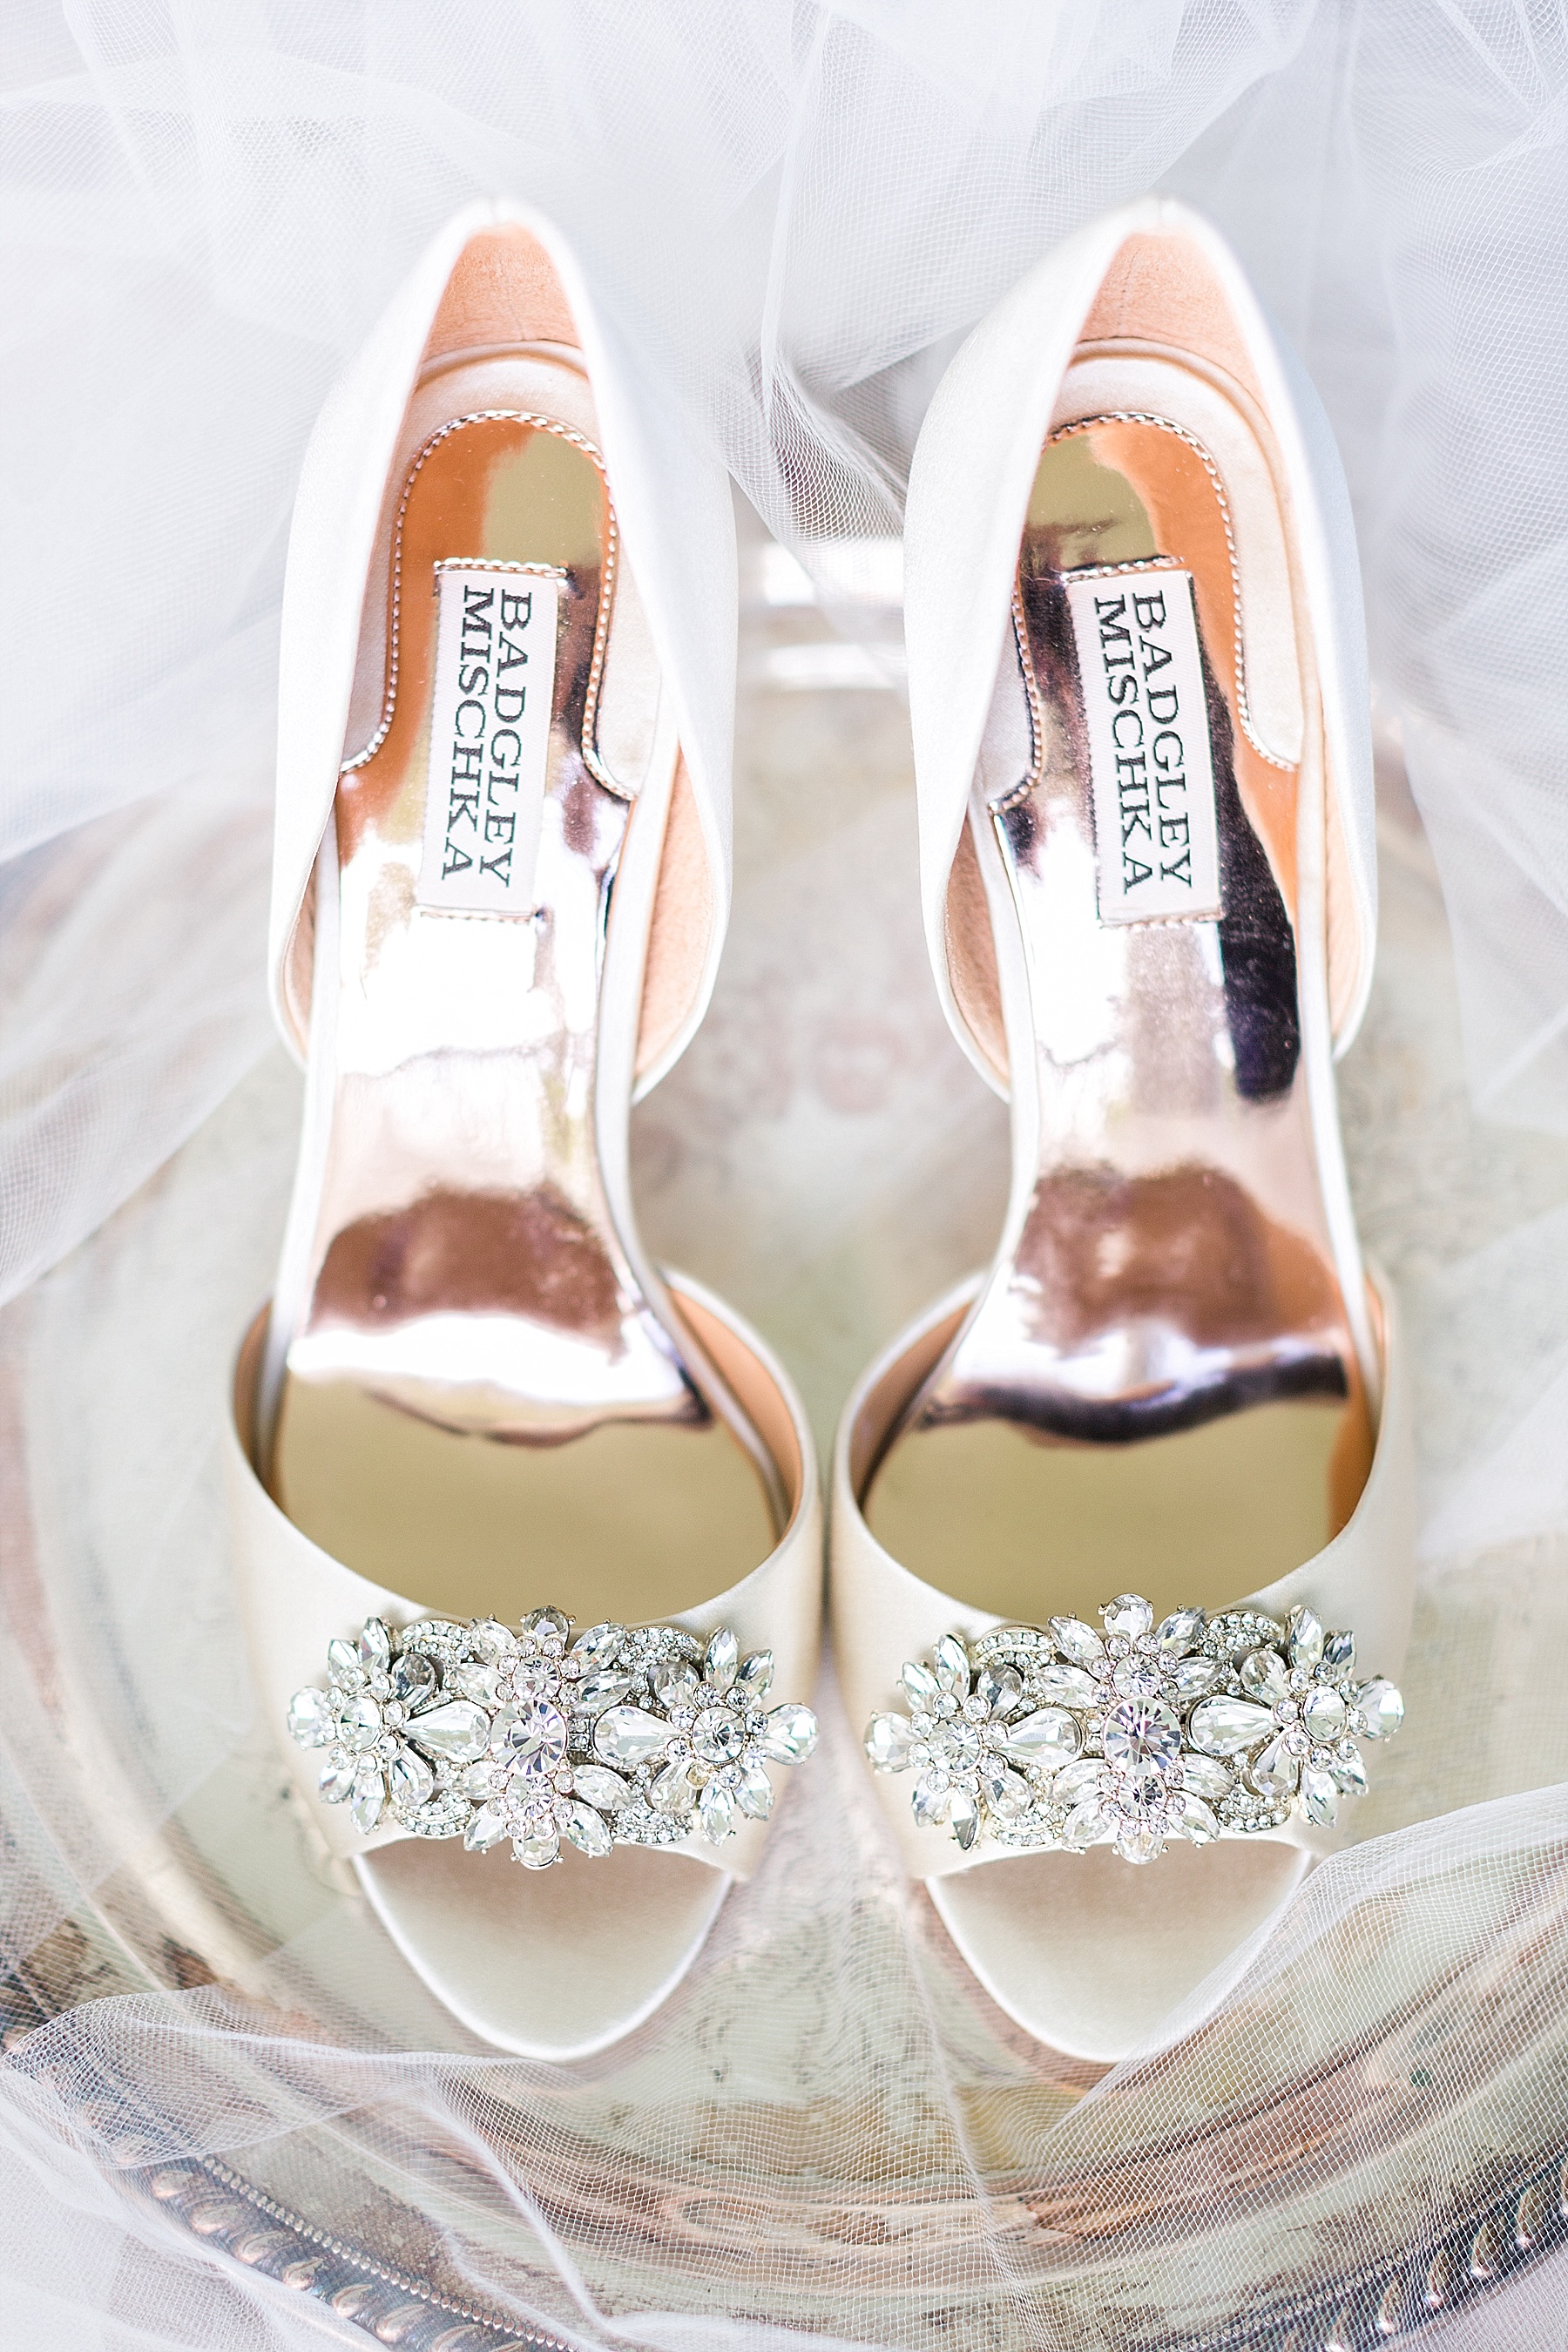 blush shoes for the bride photographed by Alexandra Mandato Photography